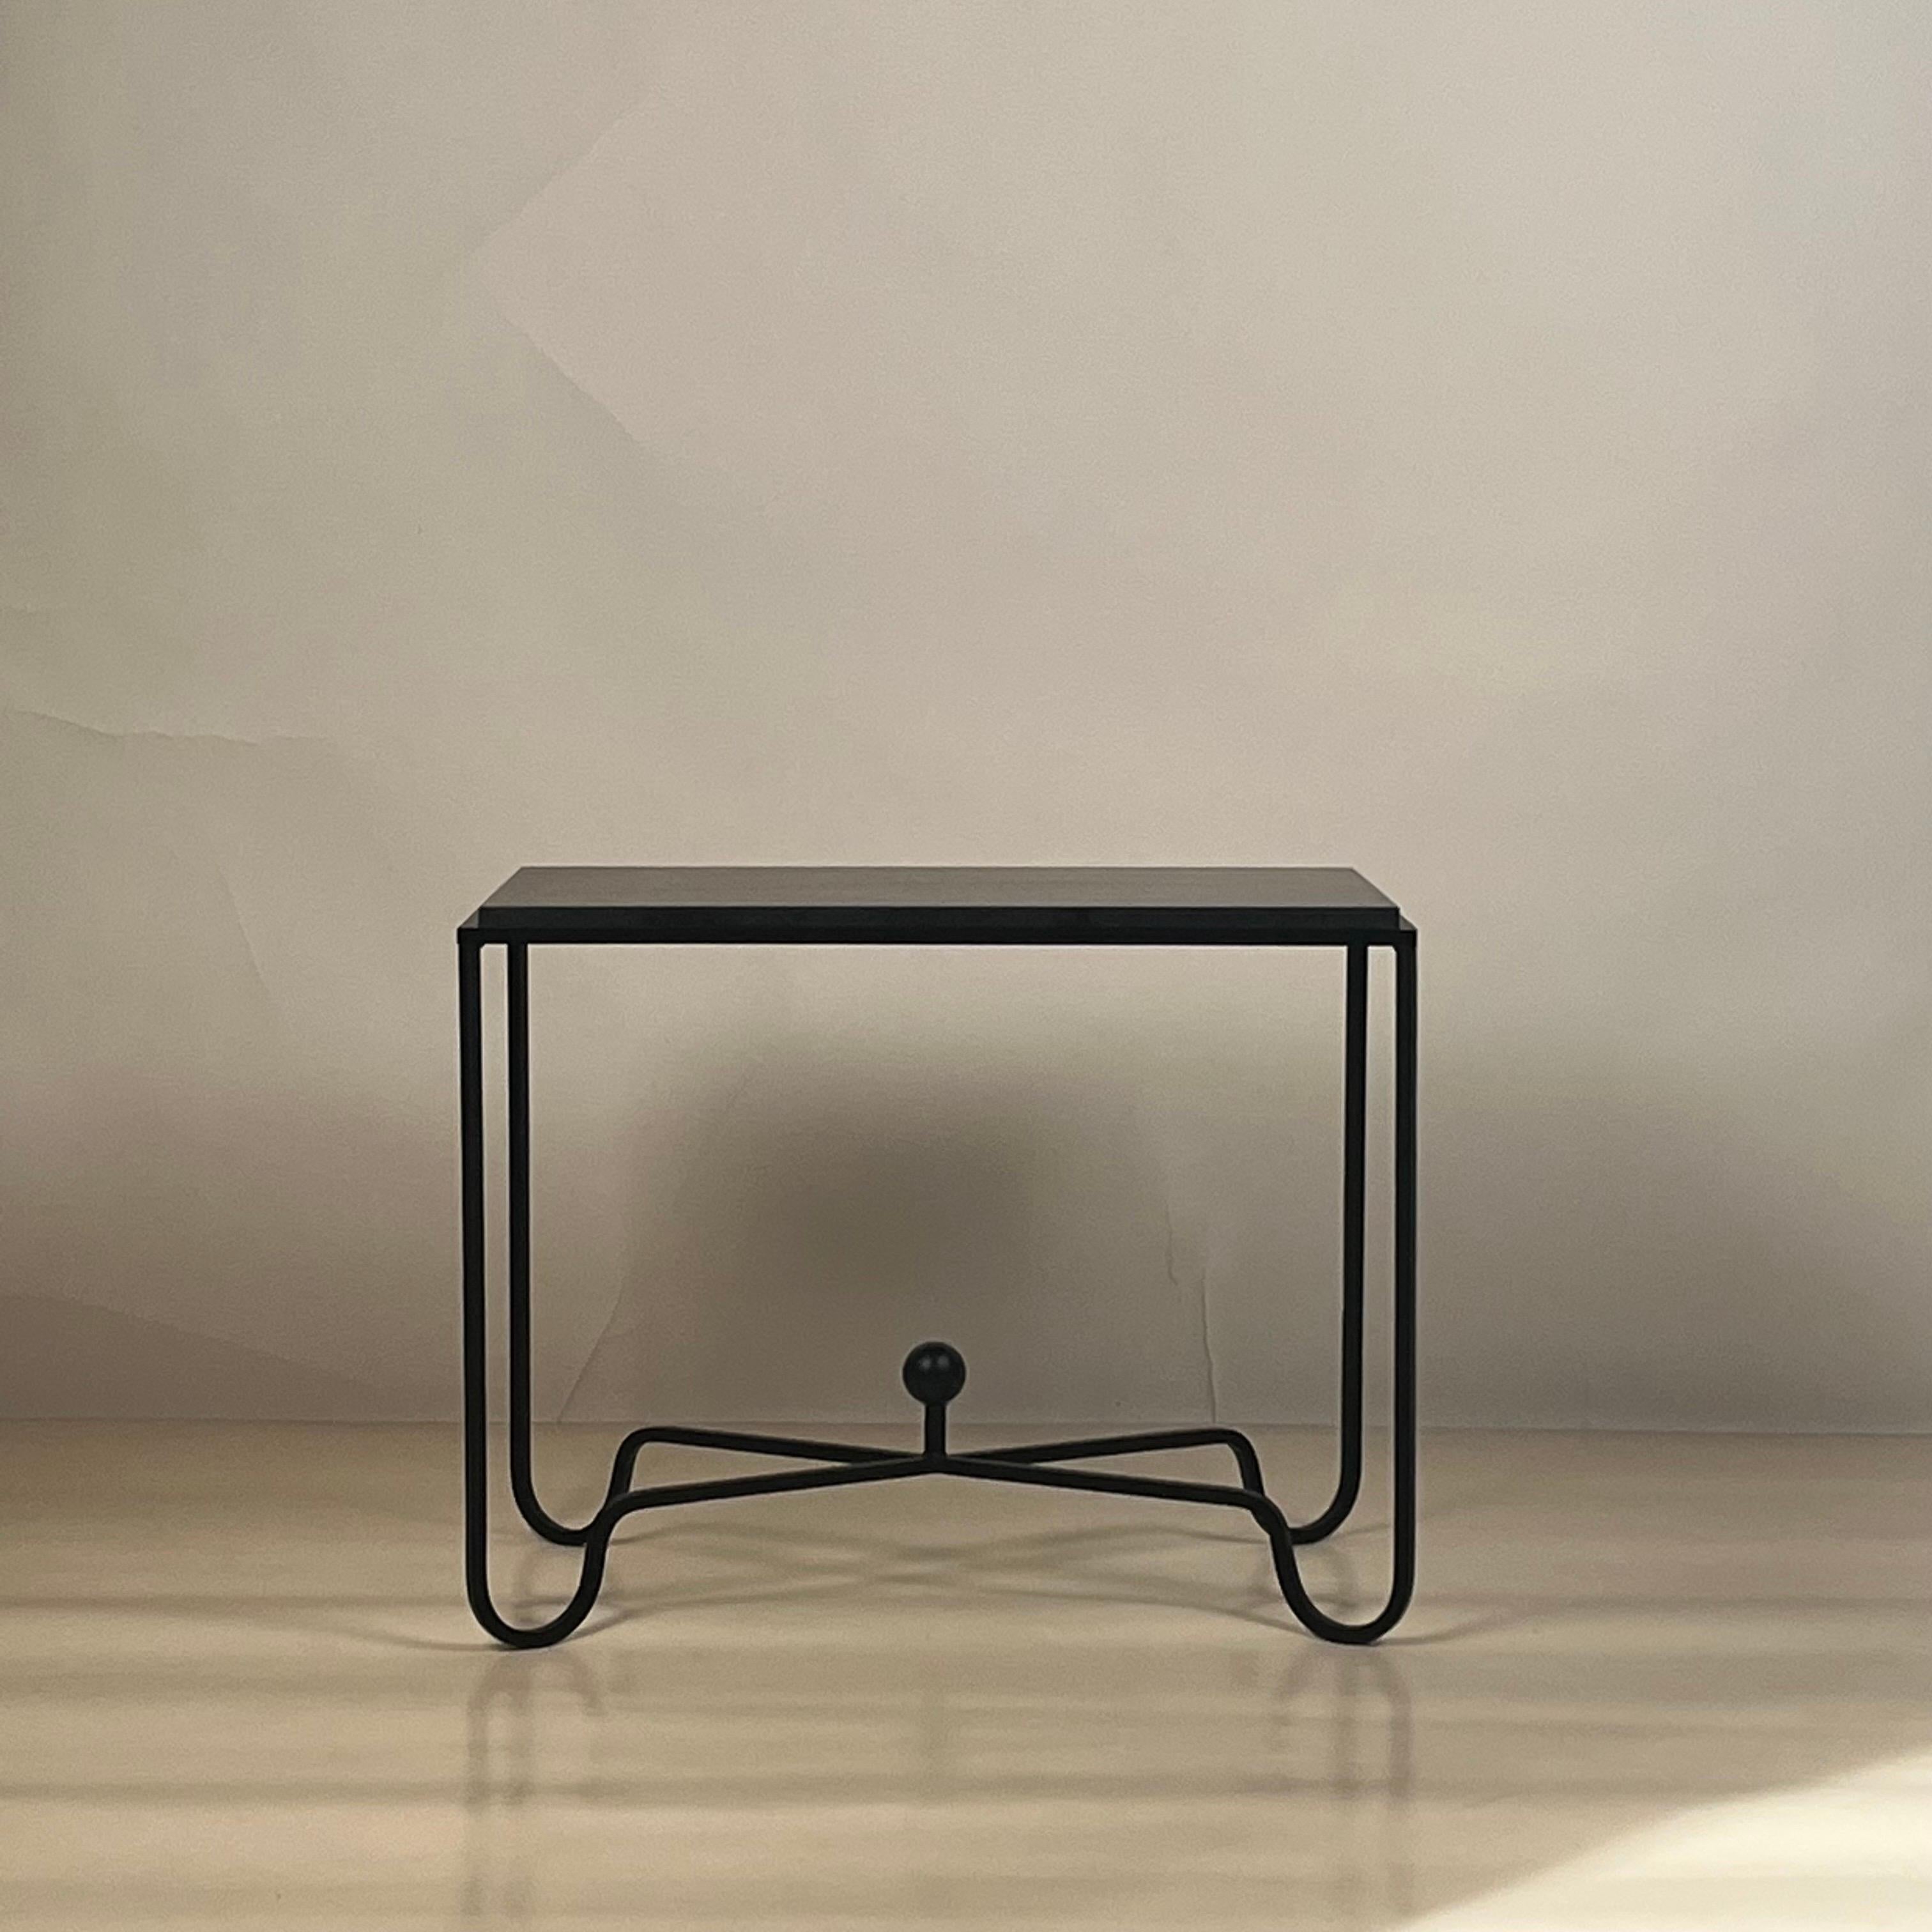 Black limestone 'Entretoise' end table by Design Frères.

Chic and understated.